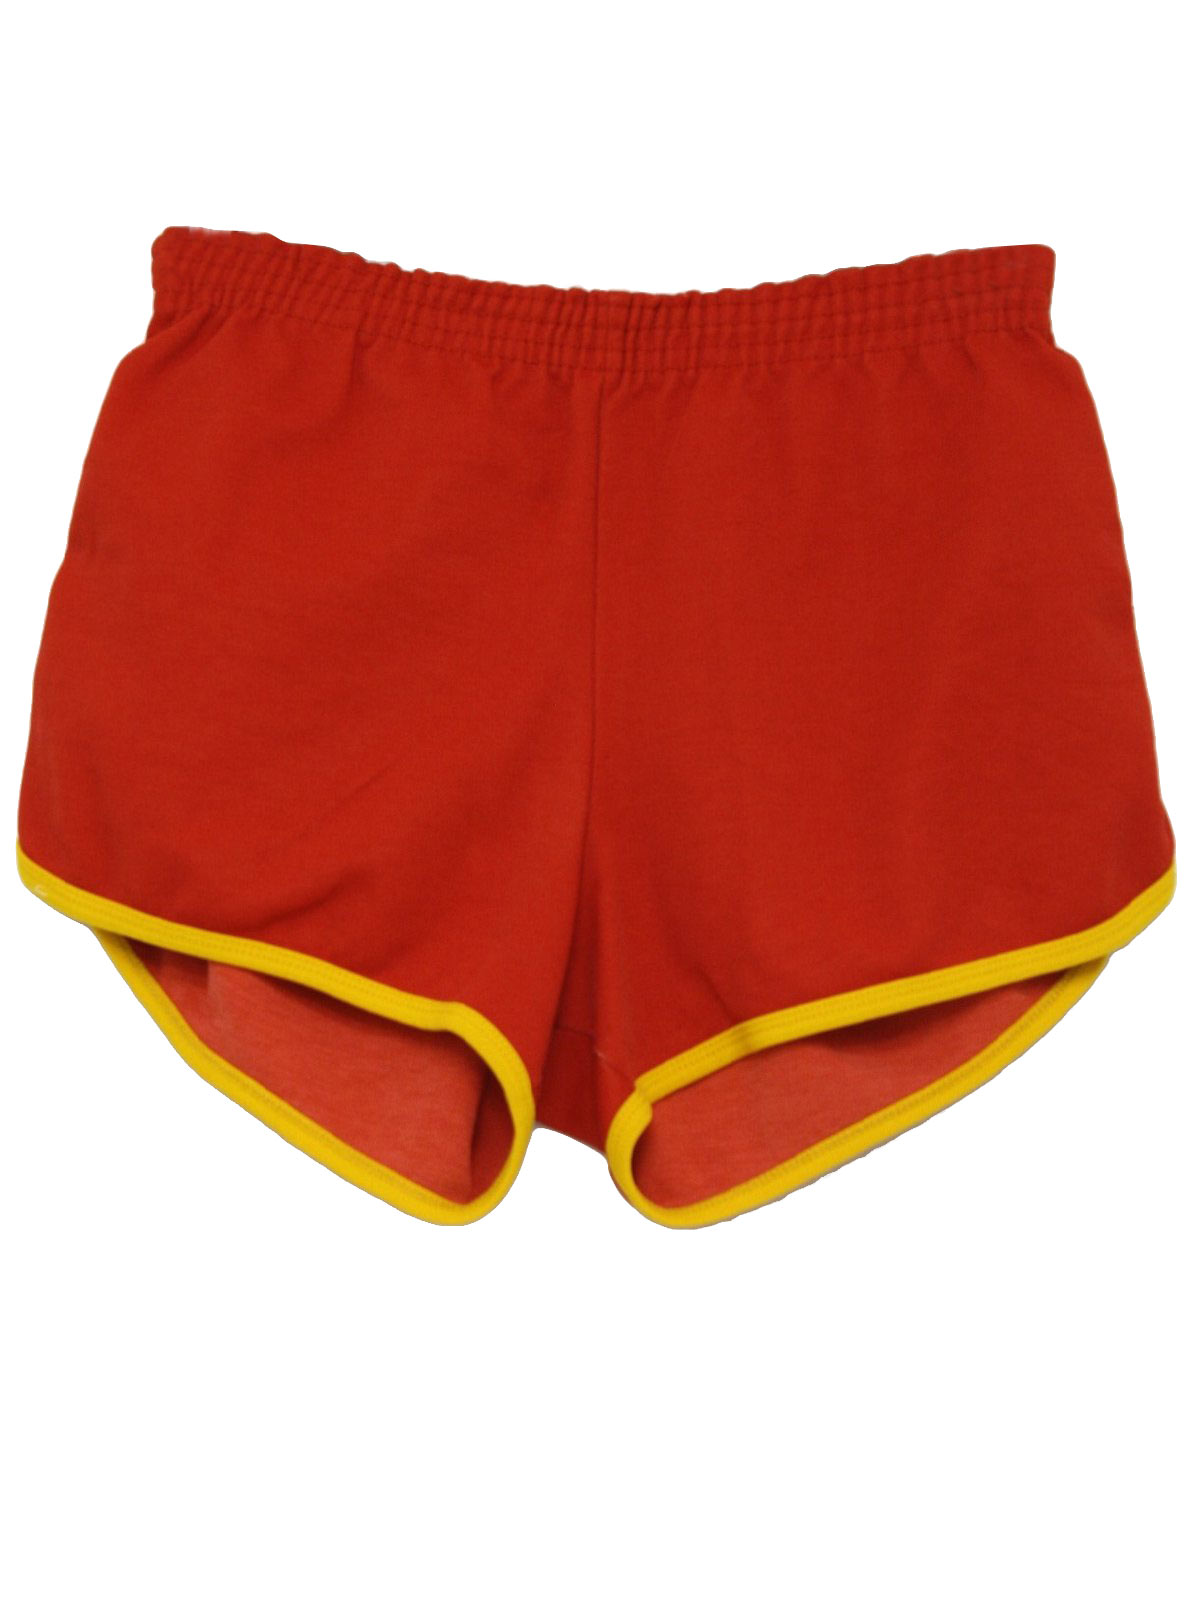 1970's Retro Shorts: 70s -Russell Athletic- Unisex tomato red with ...